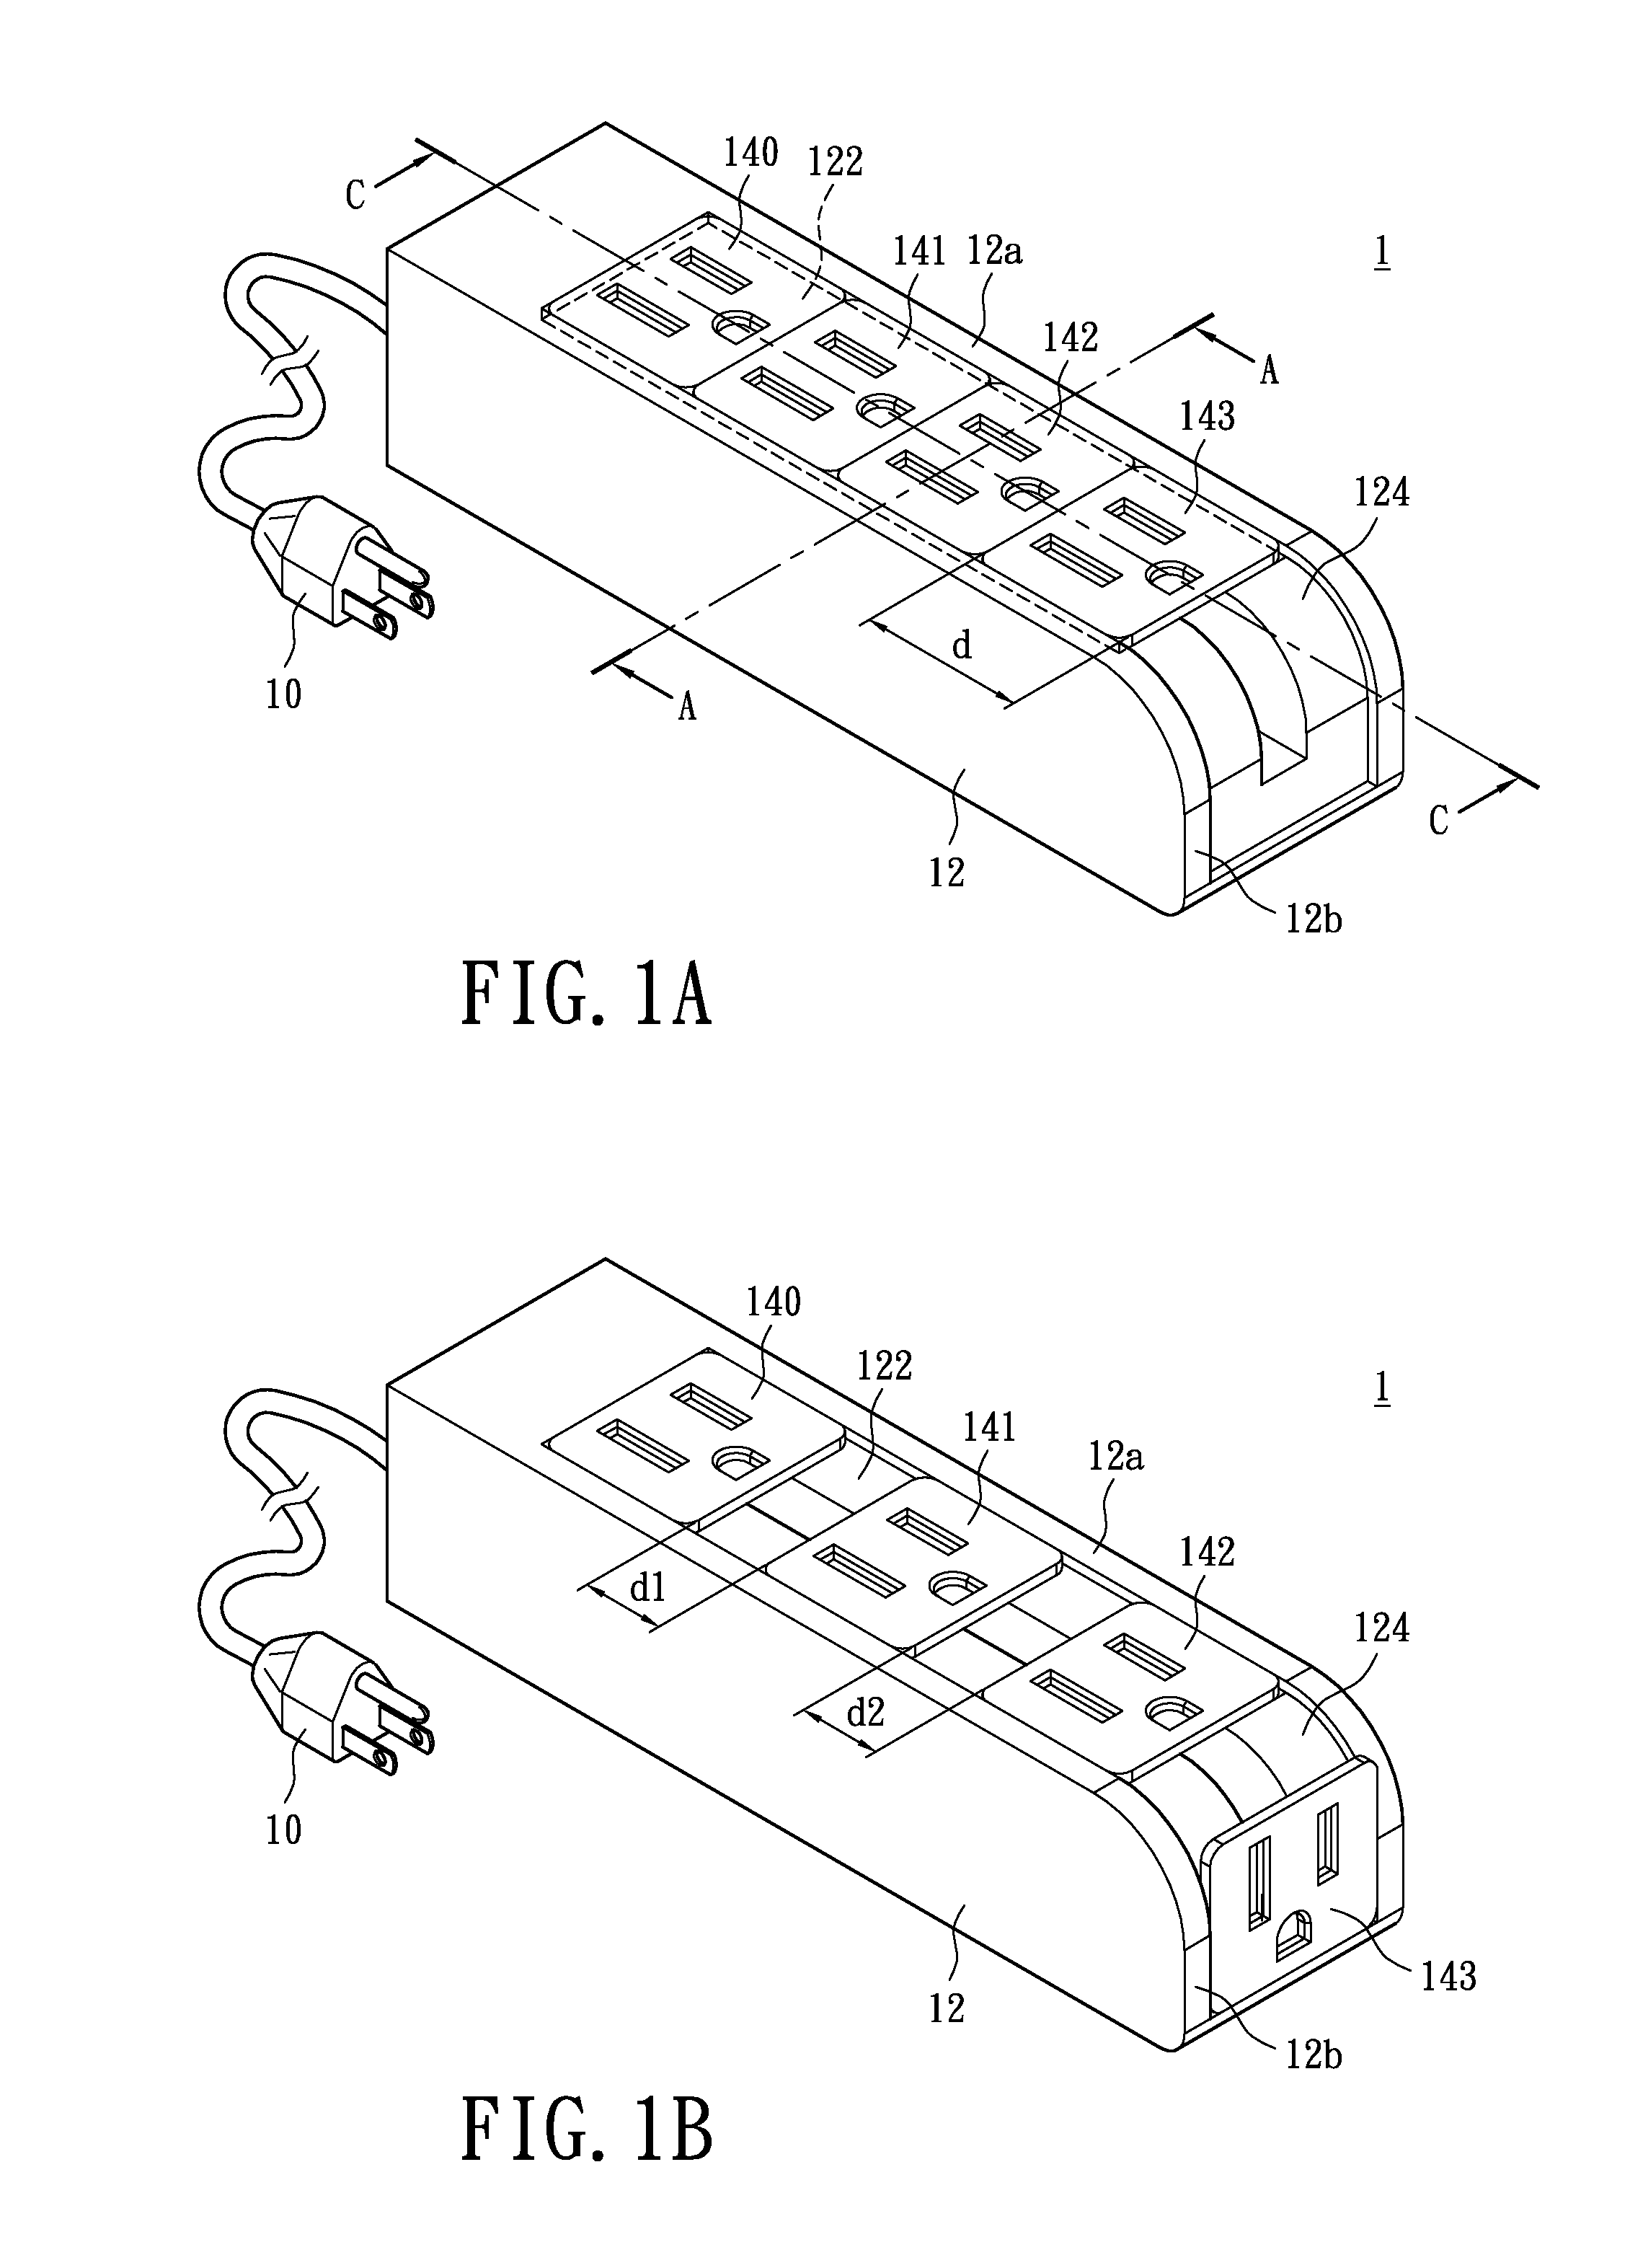 Power extension cord with movable outlet modules